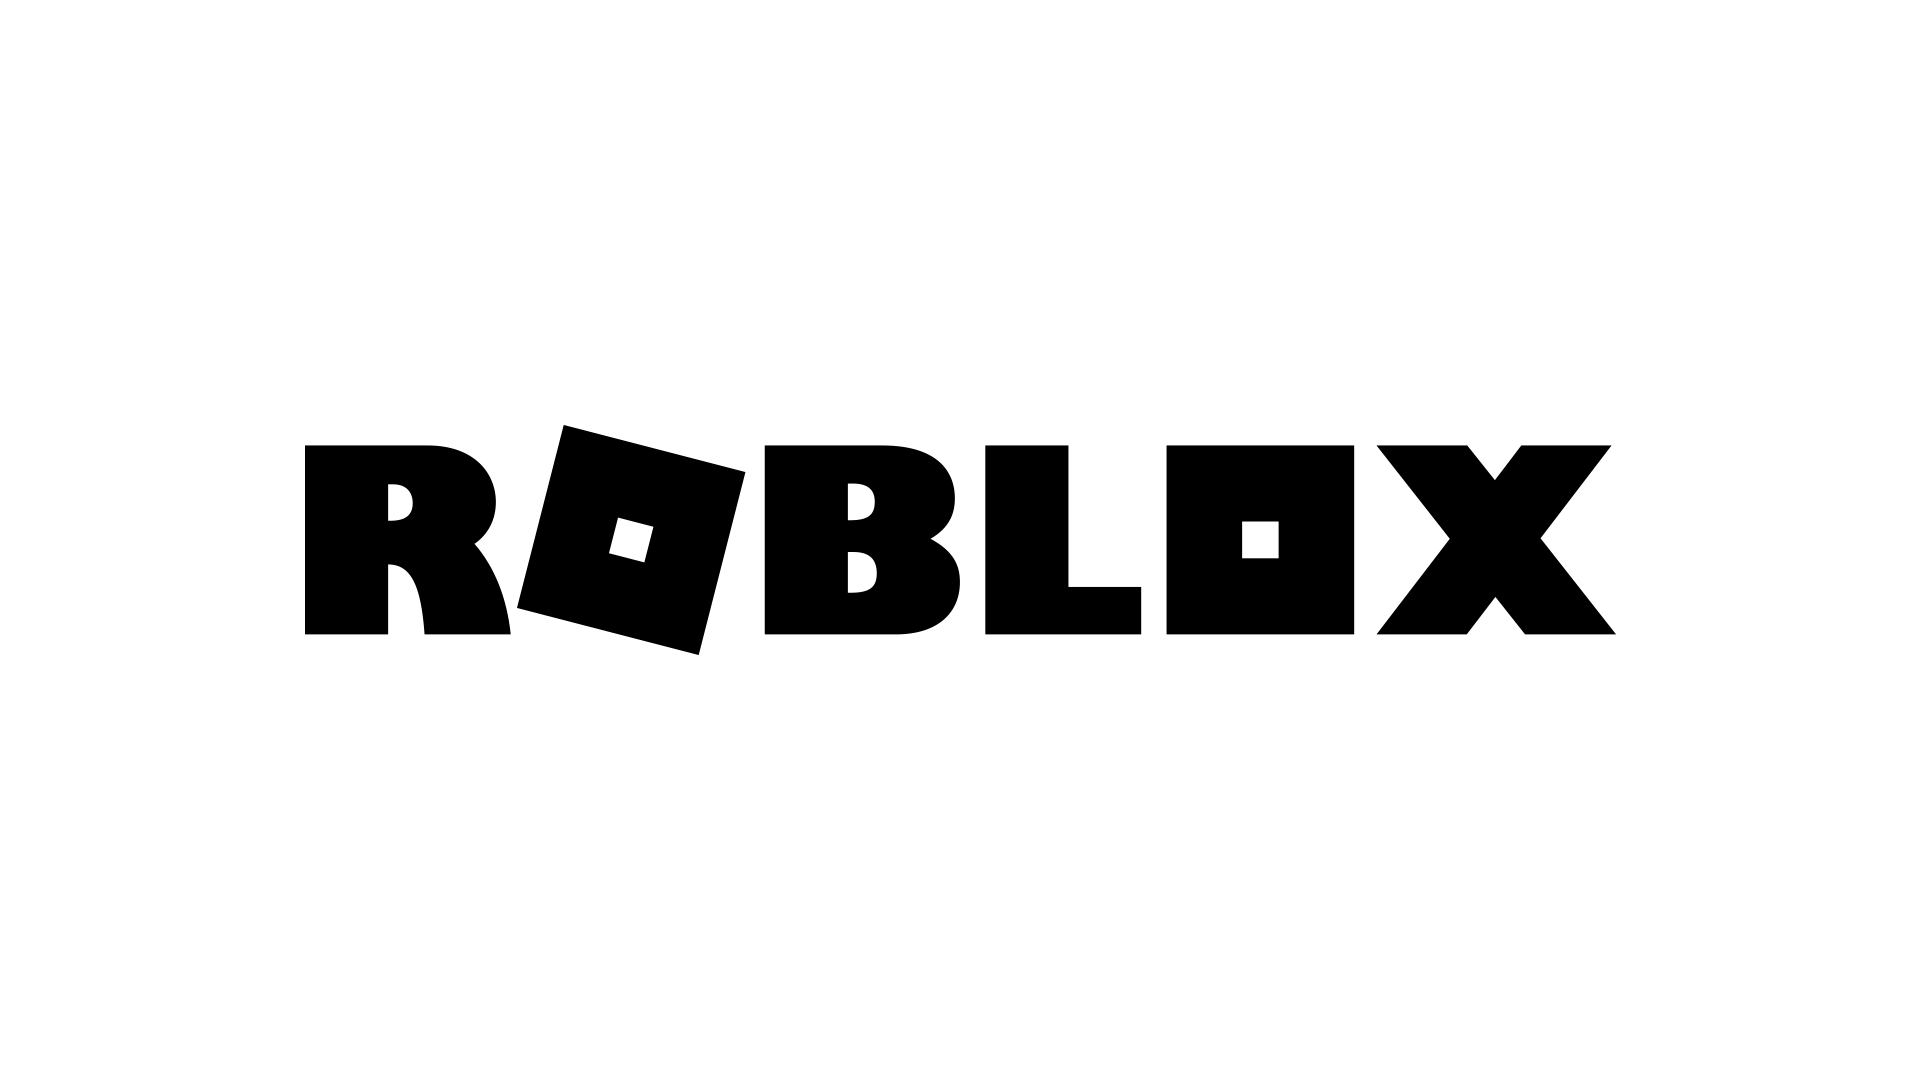 Roblox Friday at UNCC  Digital Literacy for All Learners